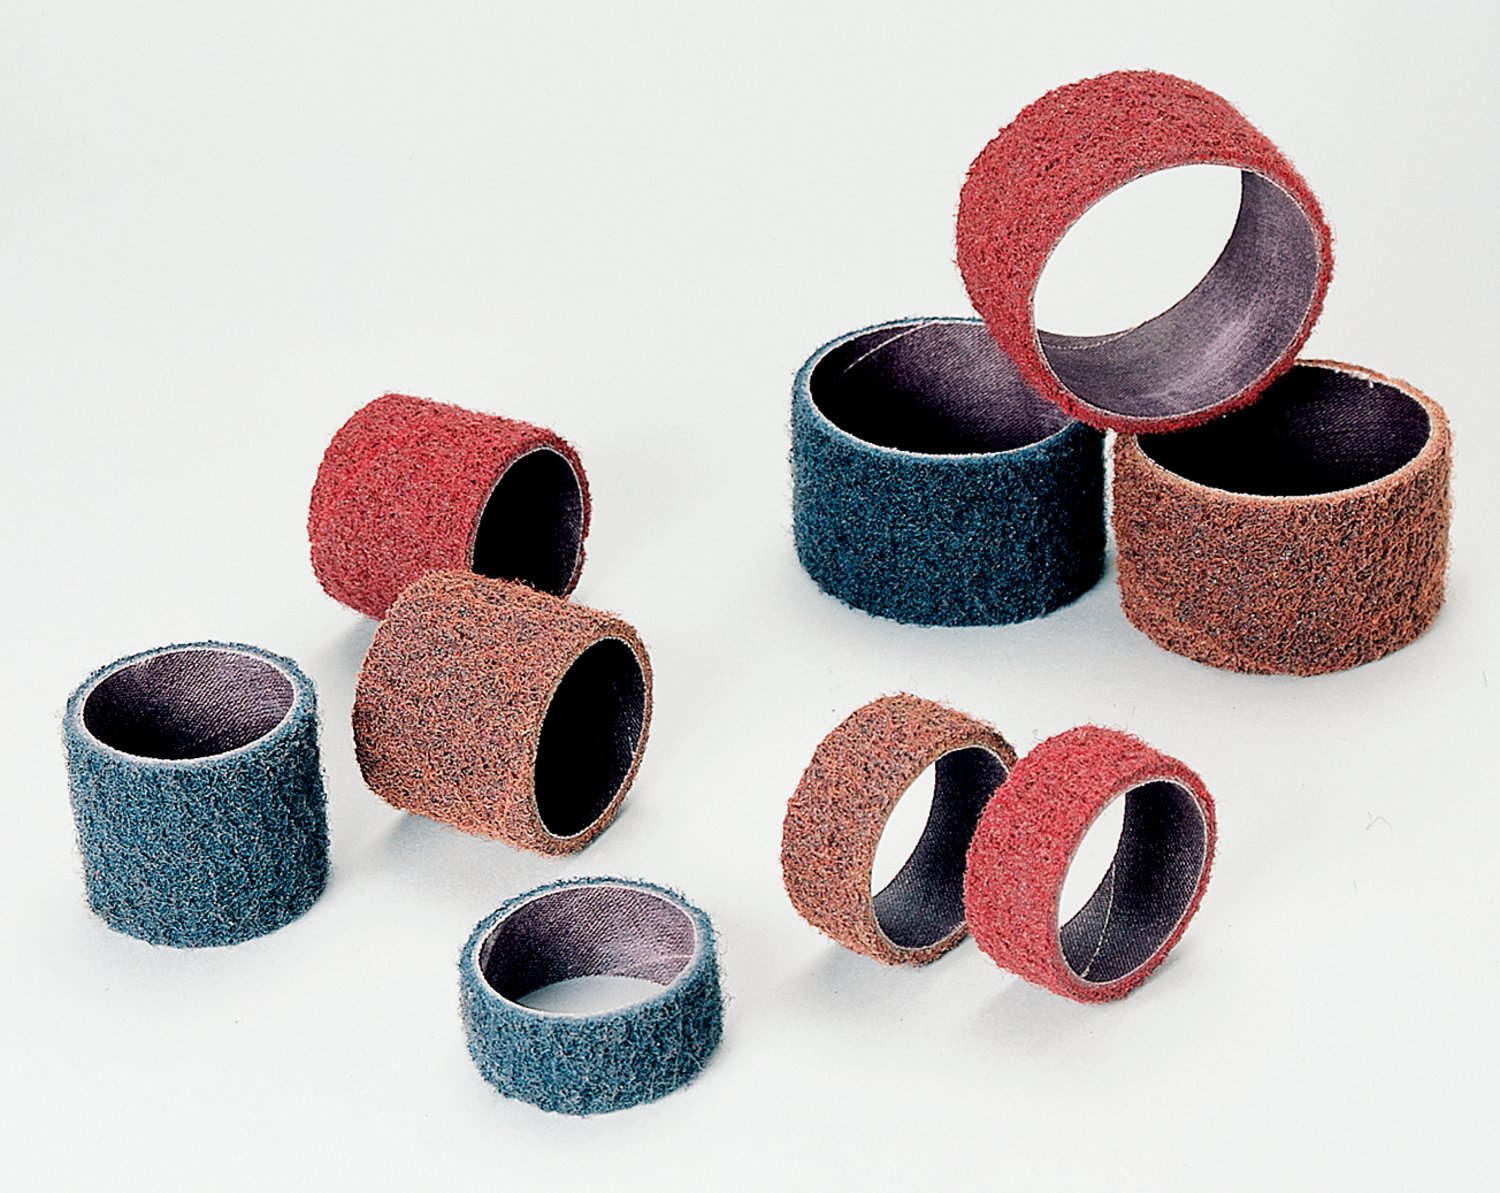 7010368747 - Standard Abrasives Surface Conditioning Band 727088, 1 in x 1 in VFN,
10/Carton, 100 ea/Case